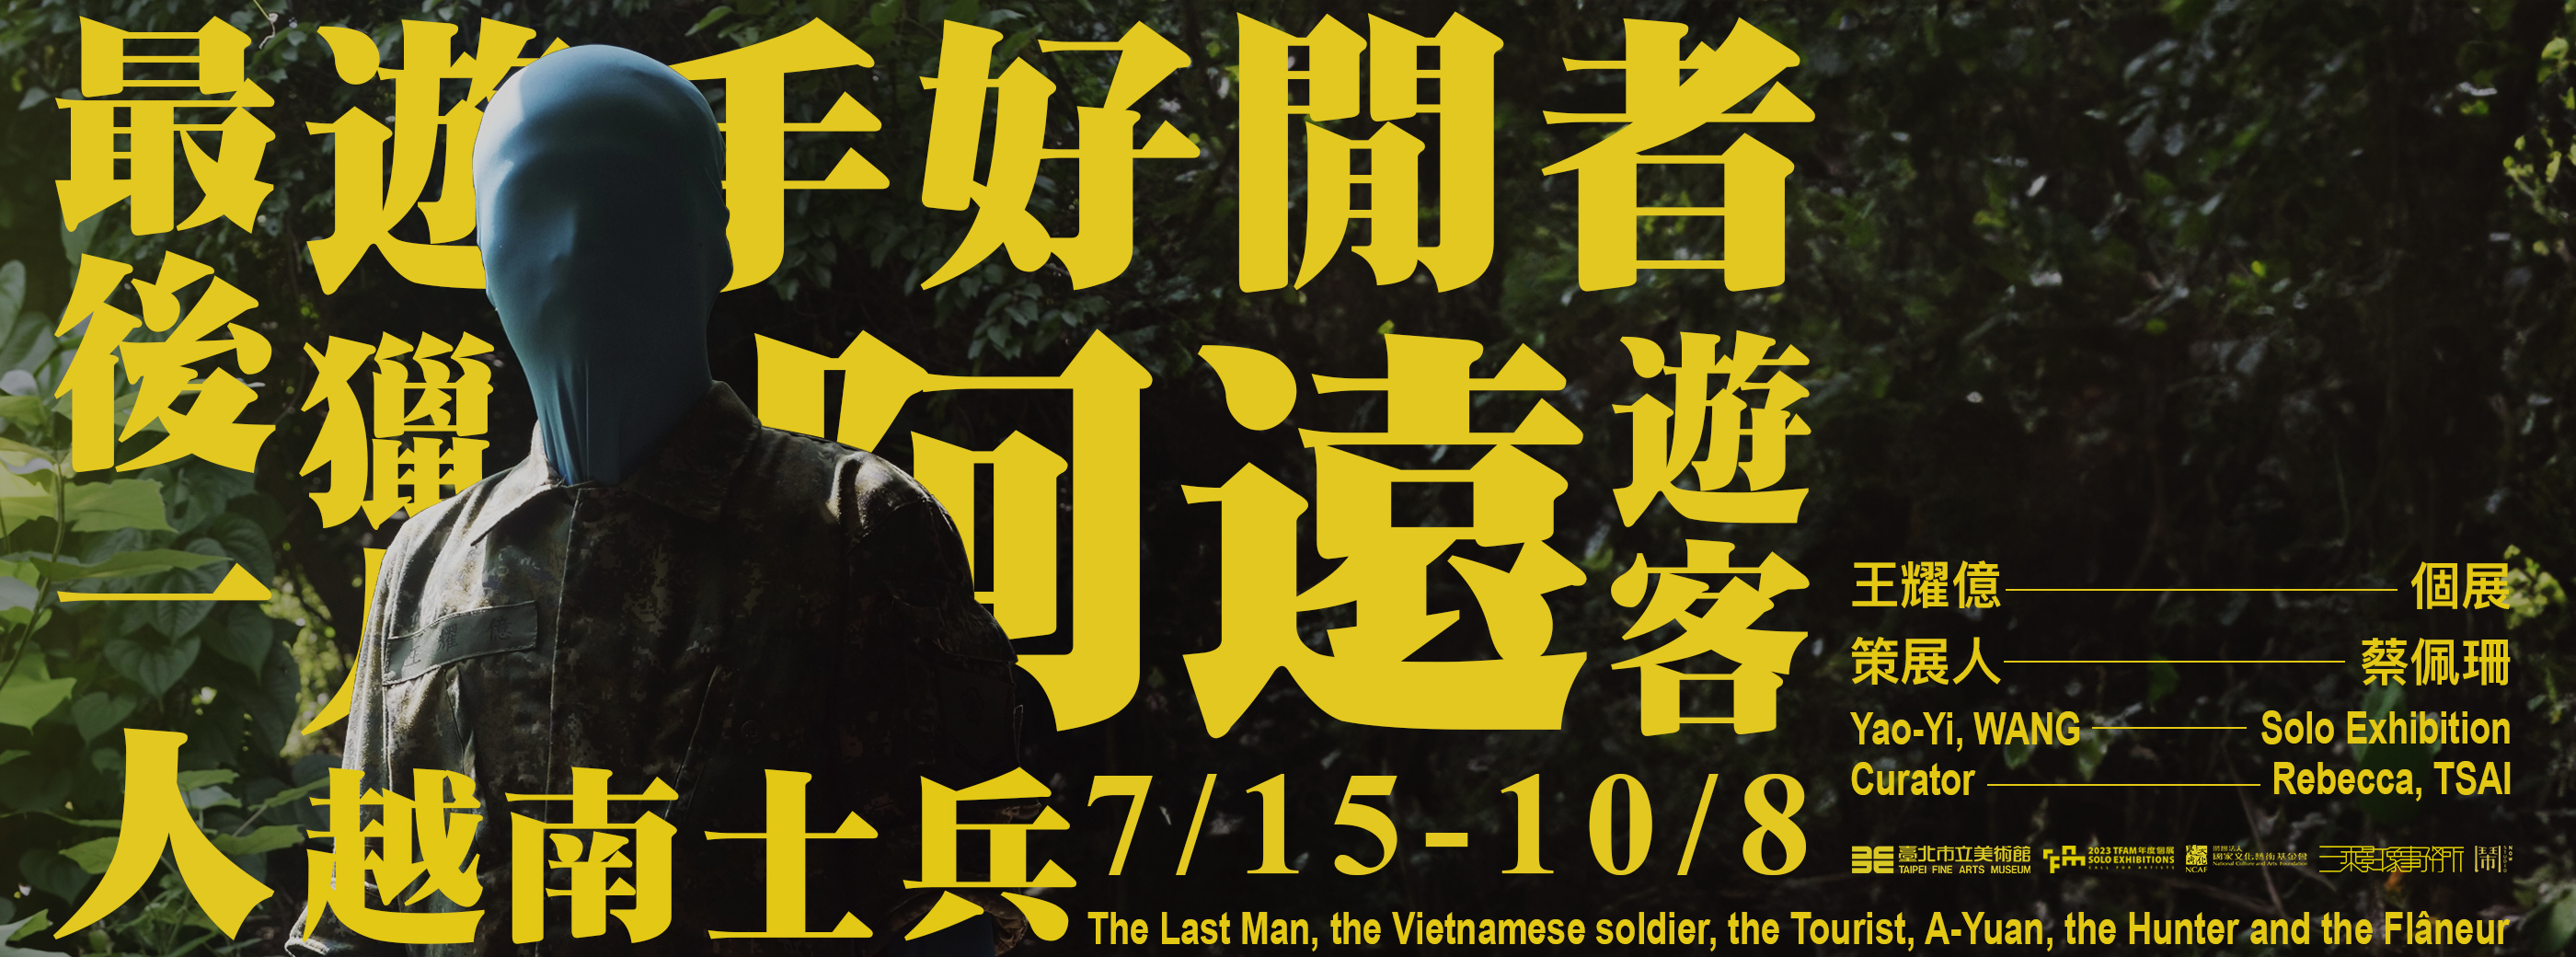 The Last Man, the Vietnamese soldier, the Tourist, A-Yuan, the Hunter and the Flâneur 的圖說